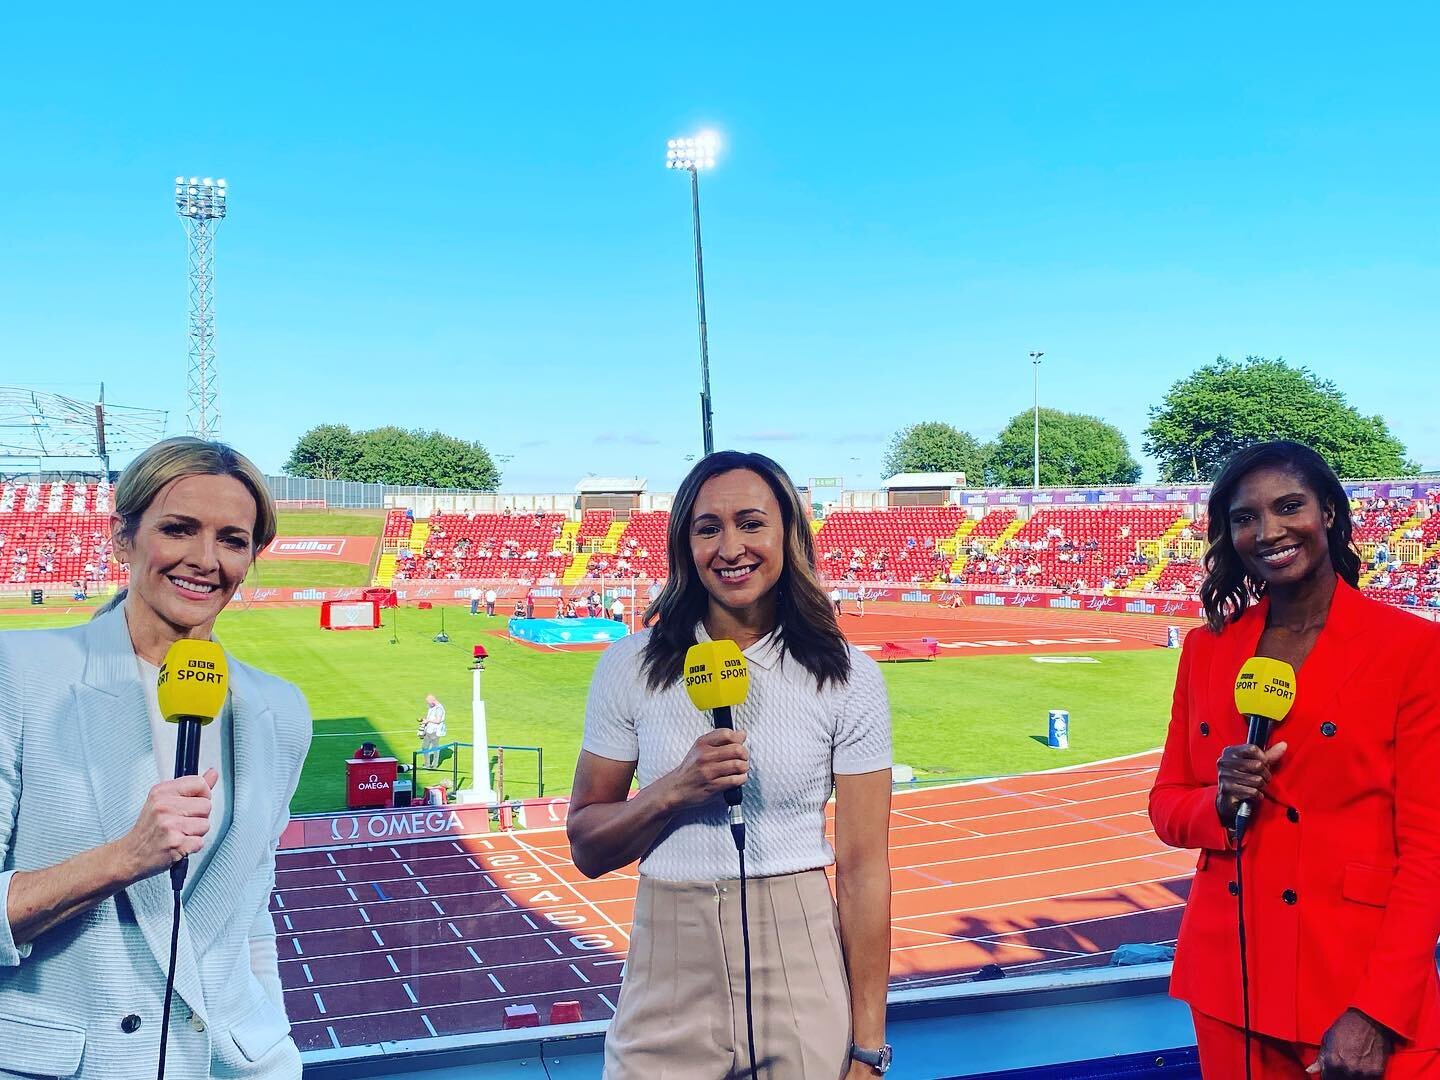 So great to be track side taking in some live athletics with @gabbylogan and @realdeniselewis. It&rsquo;s been a tough road for so many of the athletes to get to this point.

But the Olympics is finally around the corner and what a show it&rsquo;s go